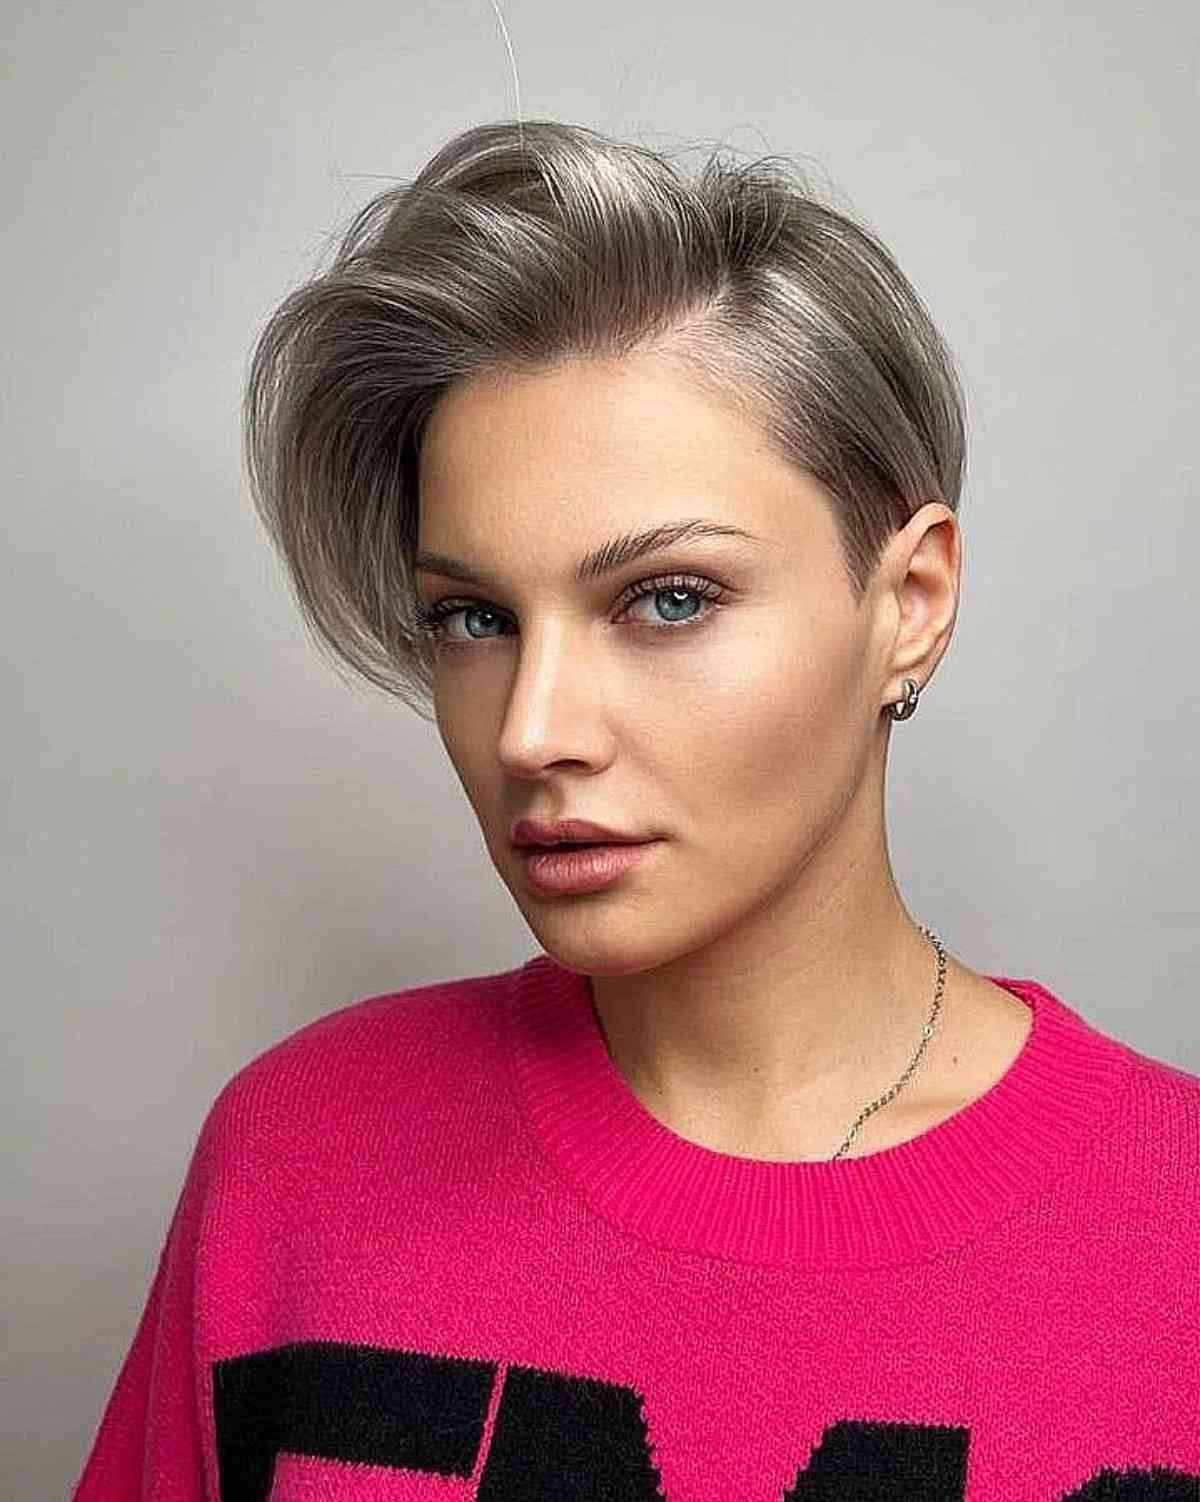 Sleek asymmetrical pixie cut with silver-gray color and longer top layers